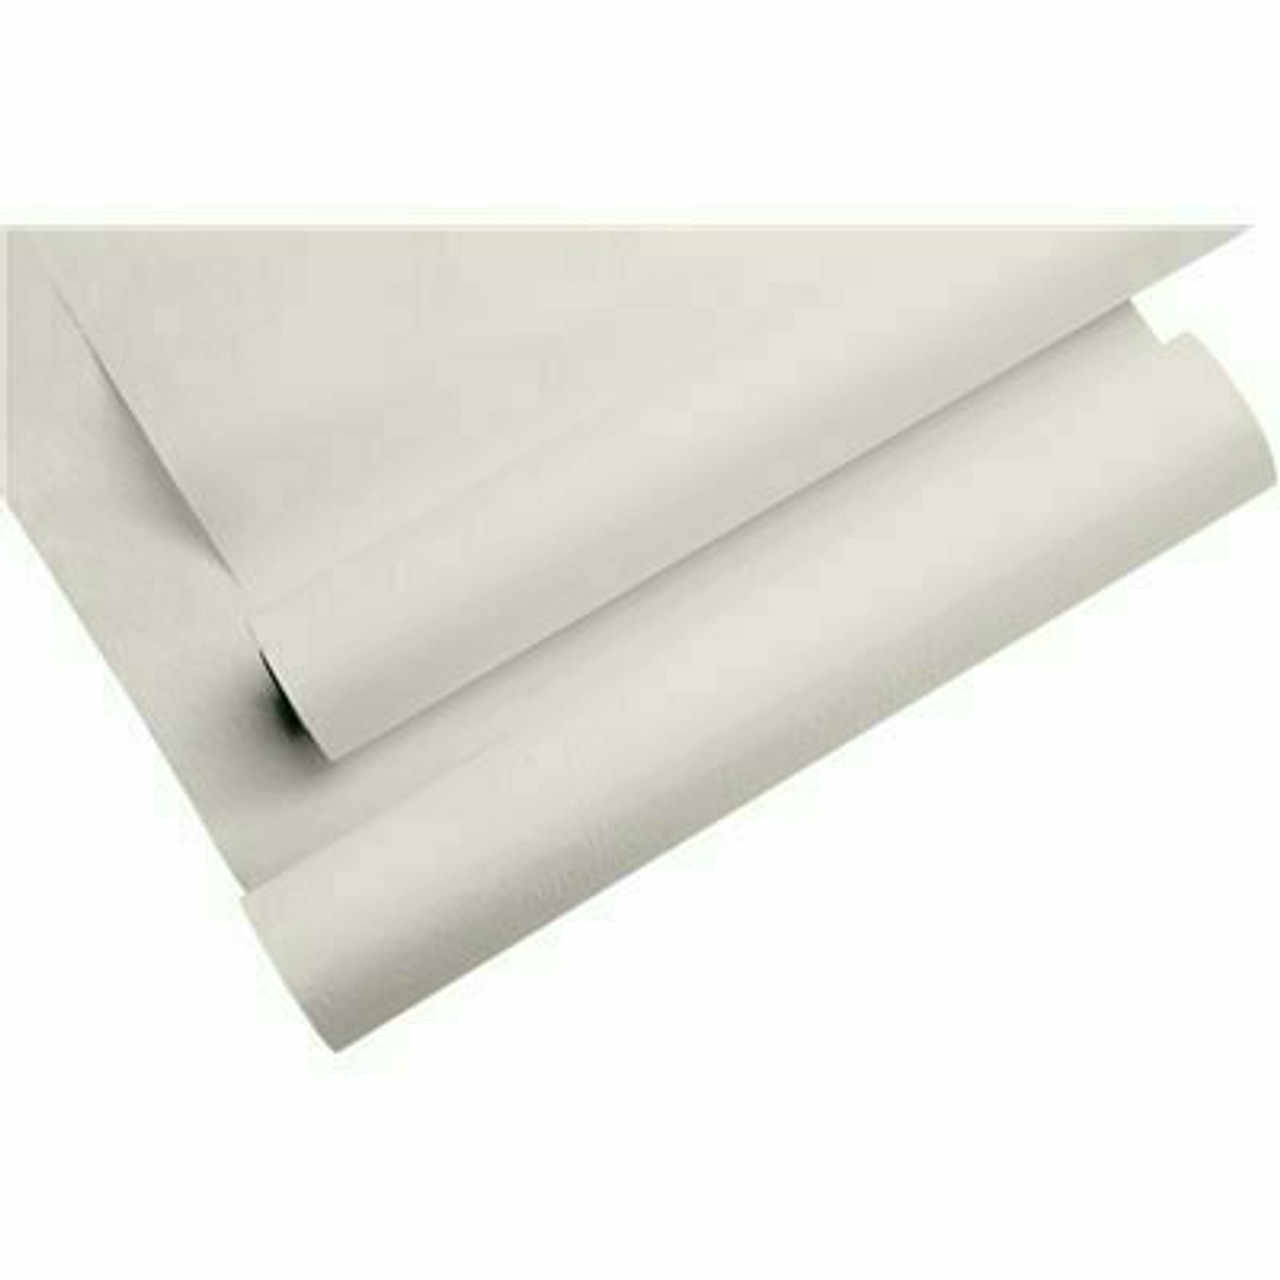 Tidi Products Paper Exam Table 18" Smooth Rolls